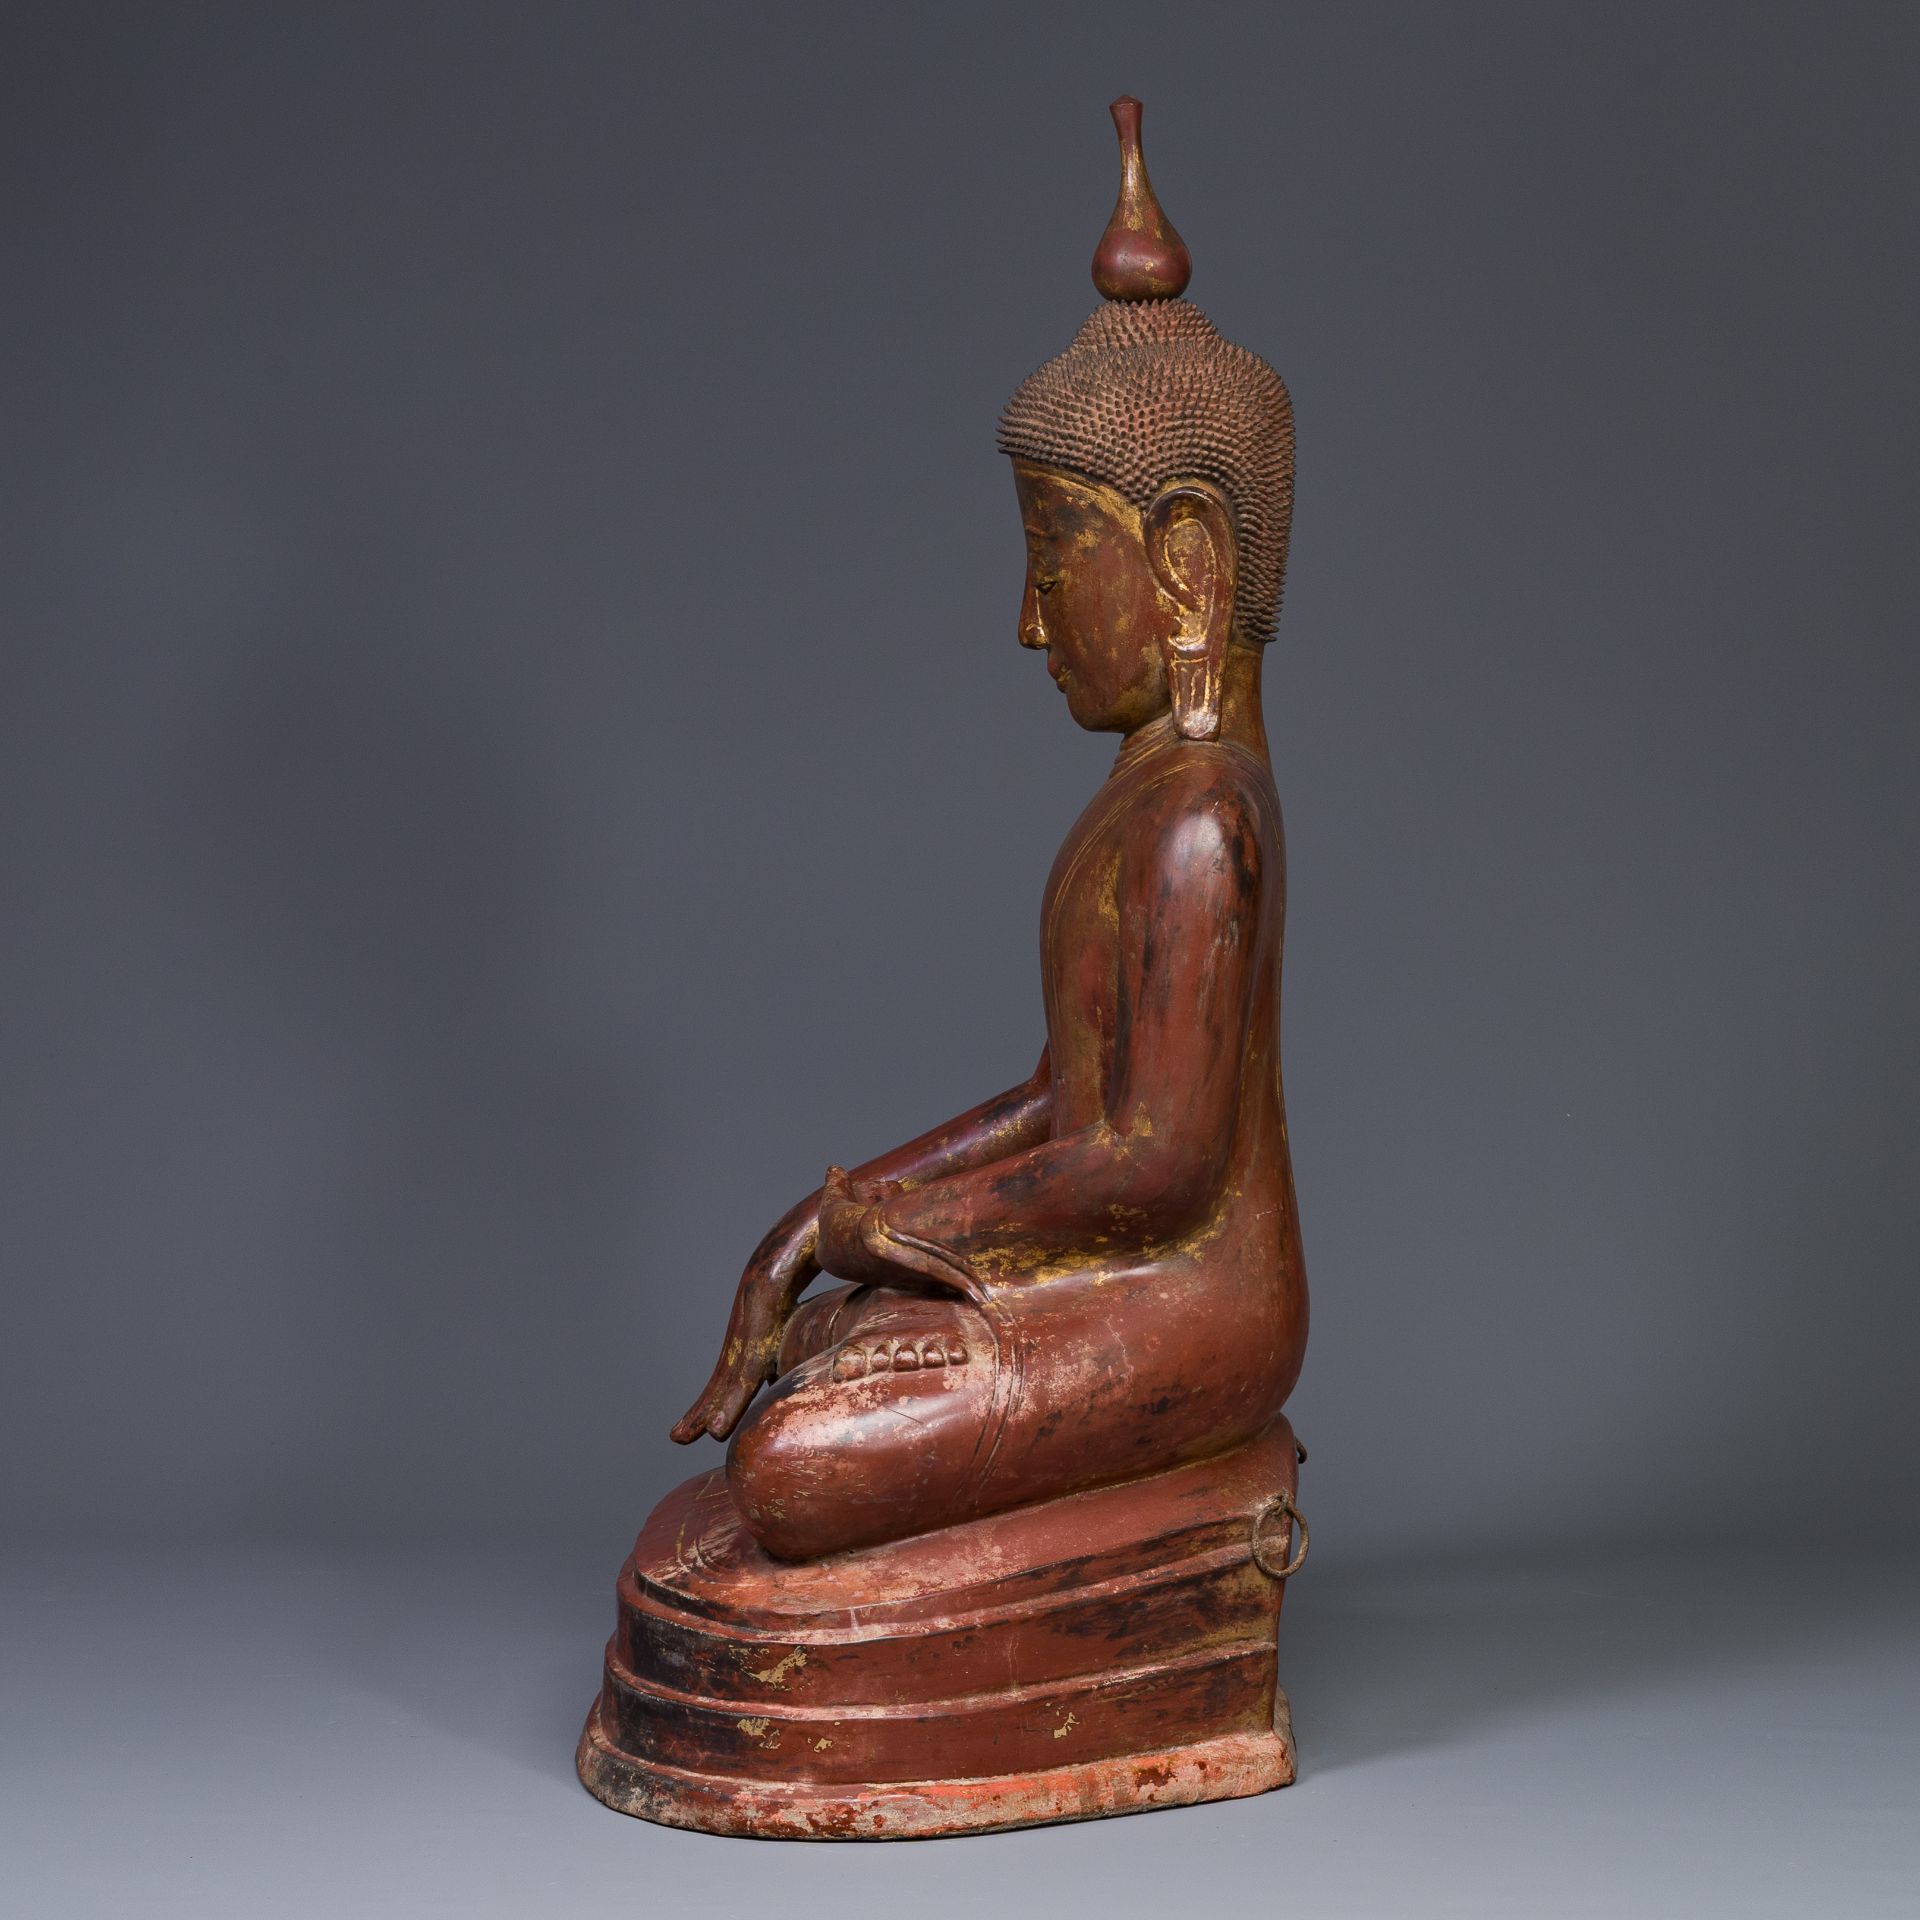 A large Burmese gilded lacquer Buddha in bhumisparsha mudra, 19/20th C. - Image 12 of 18